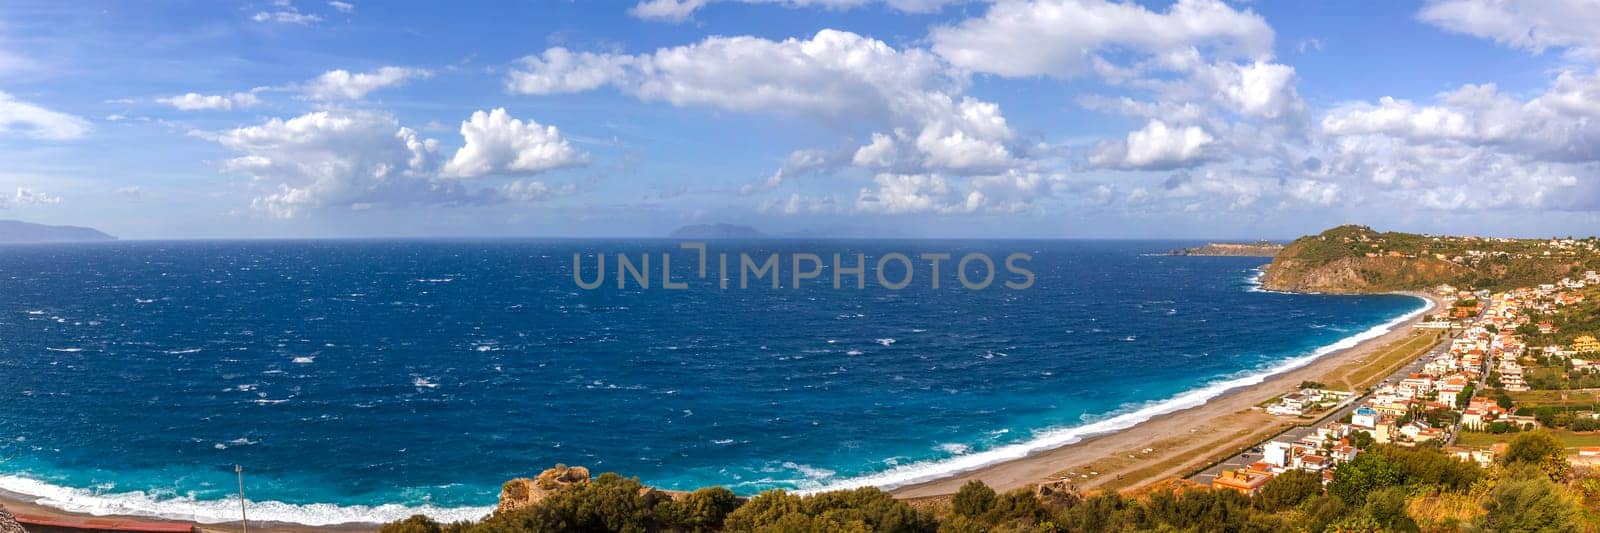 Panoramic view of bay near Milazzo city, Sicily, Italy, Europe by EdVal